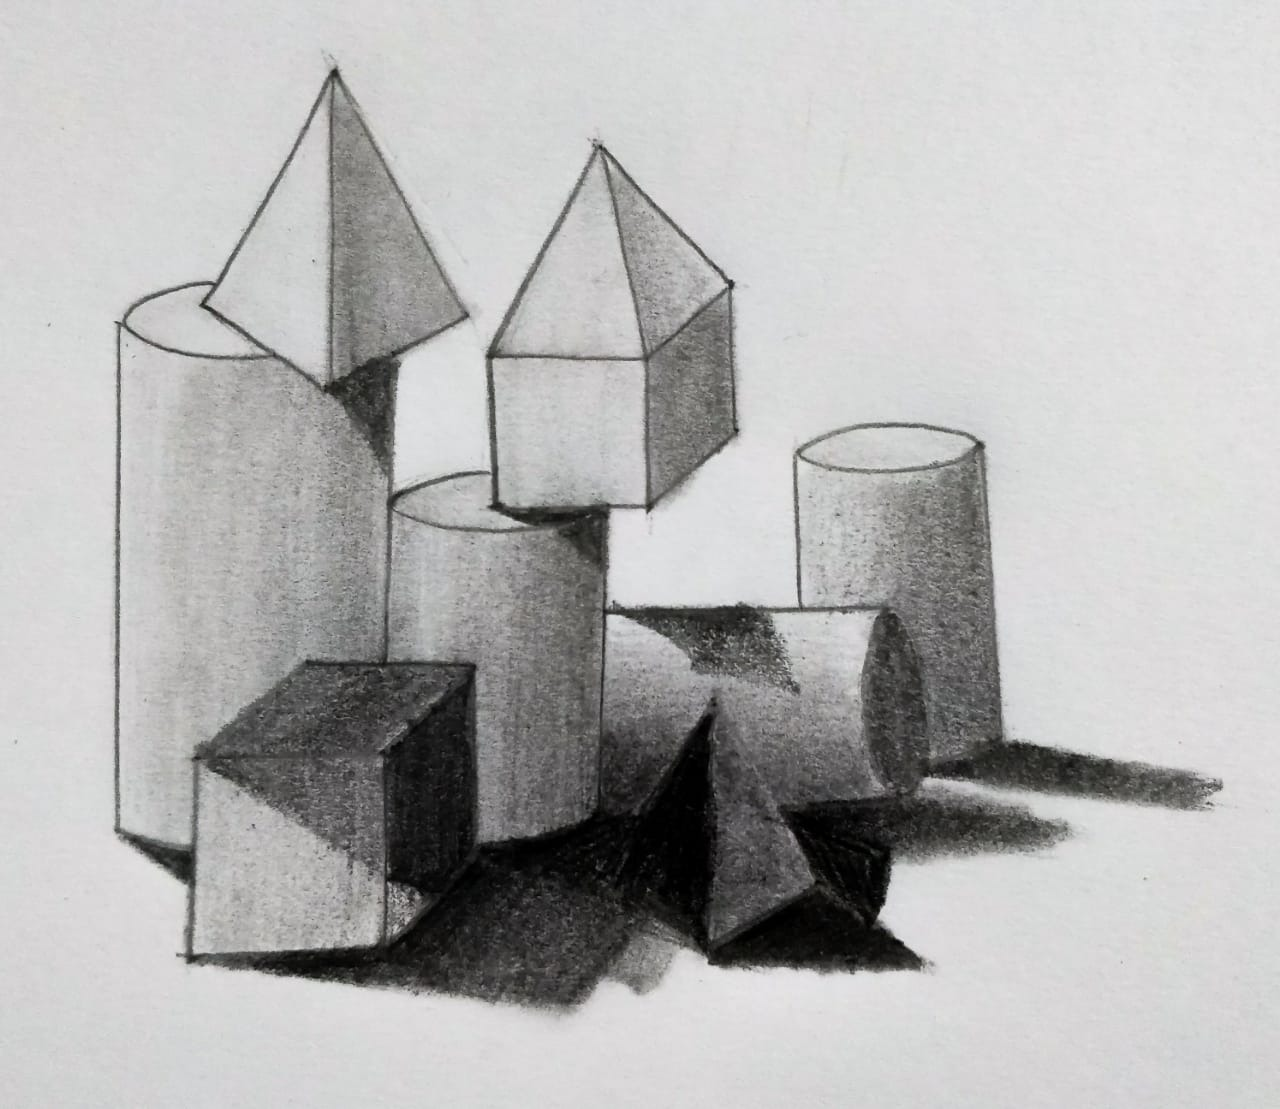 Level 3 - Shading and dimension